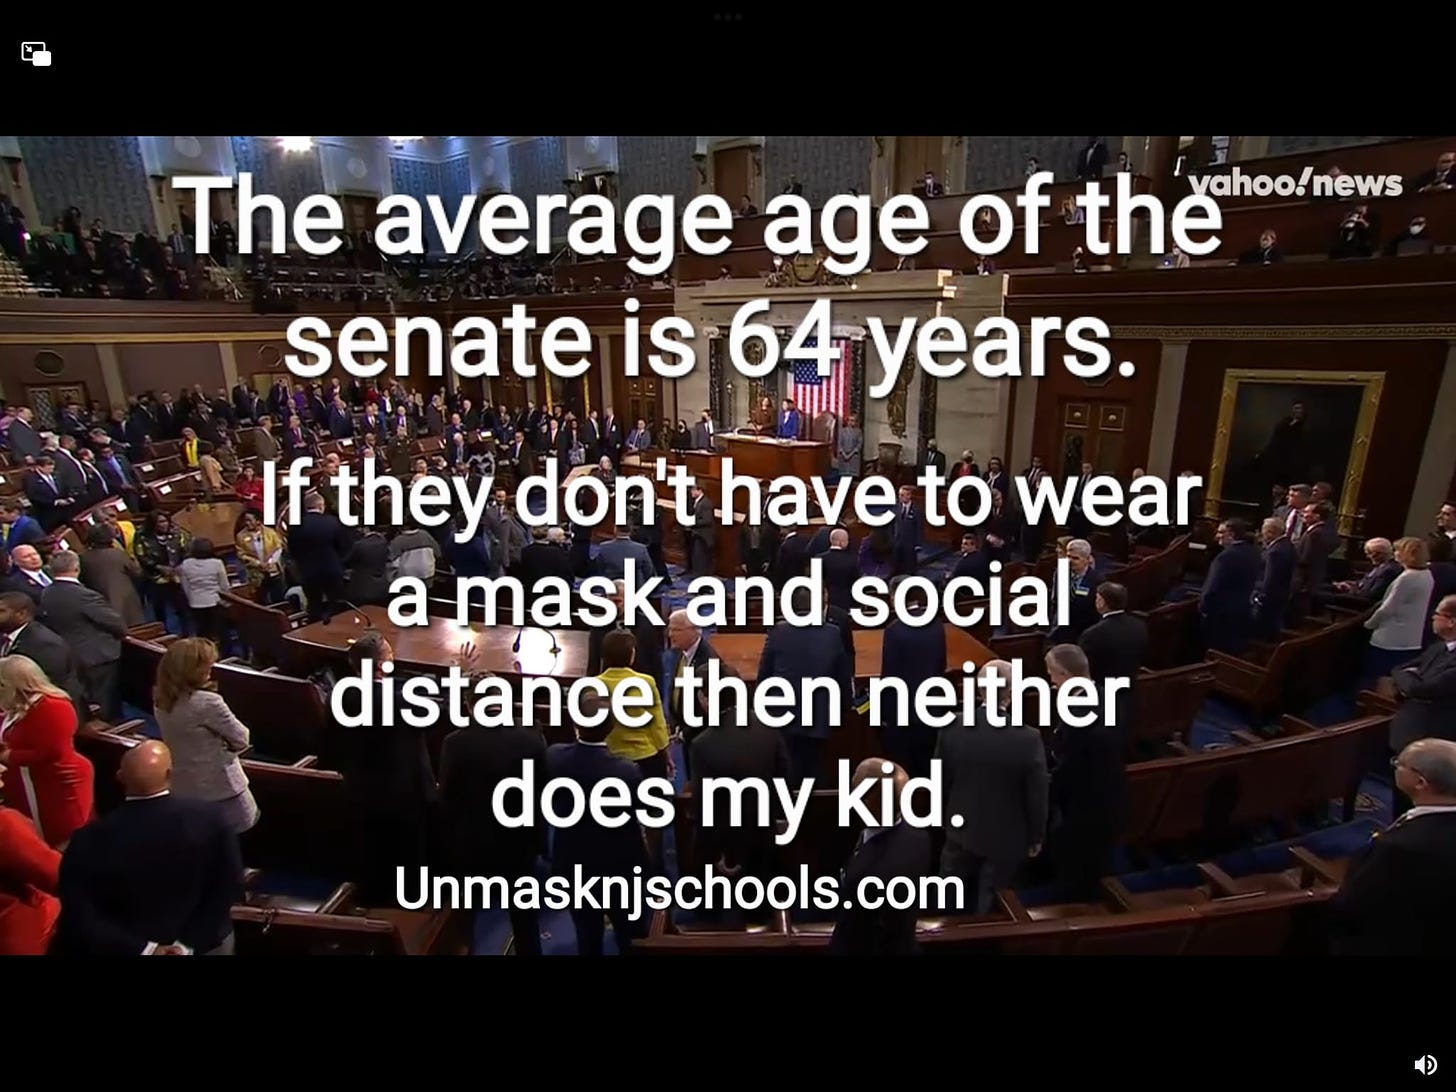 May be an image of 1 person and text that says 'The average age of the vahoo.news senate is 64 years. If they don't have to wear amaskand social distance then neither does my kid. Unmasknjschools.com'